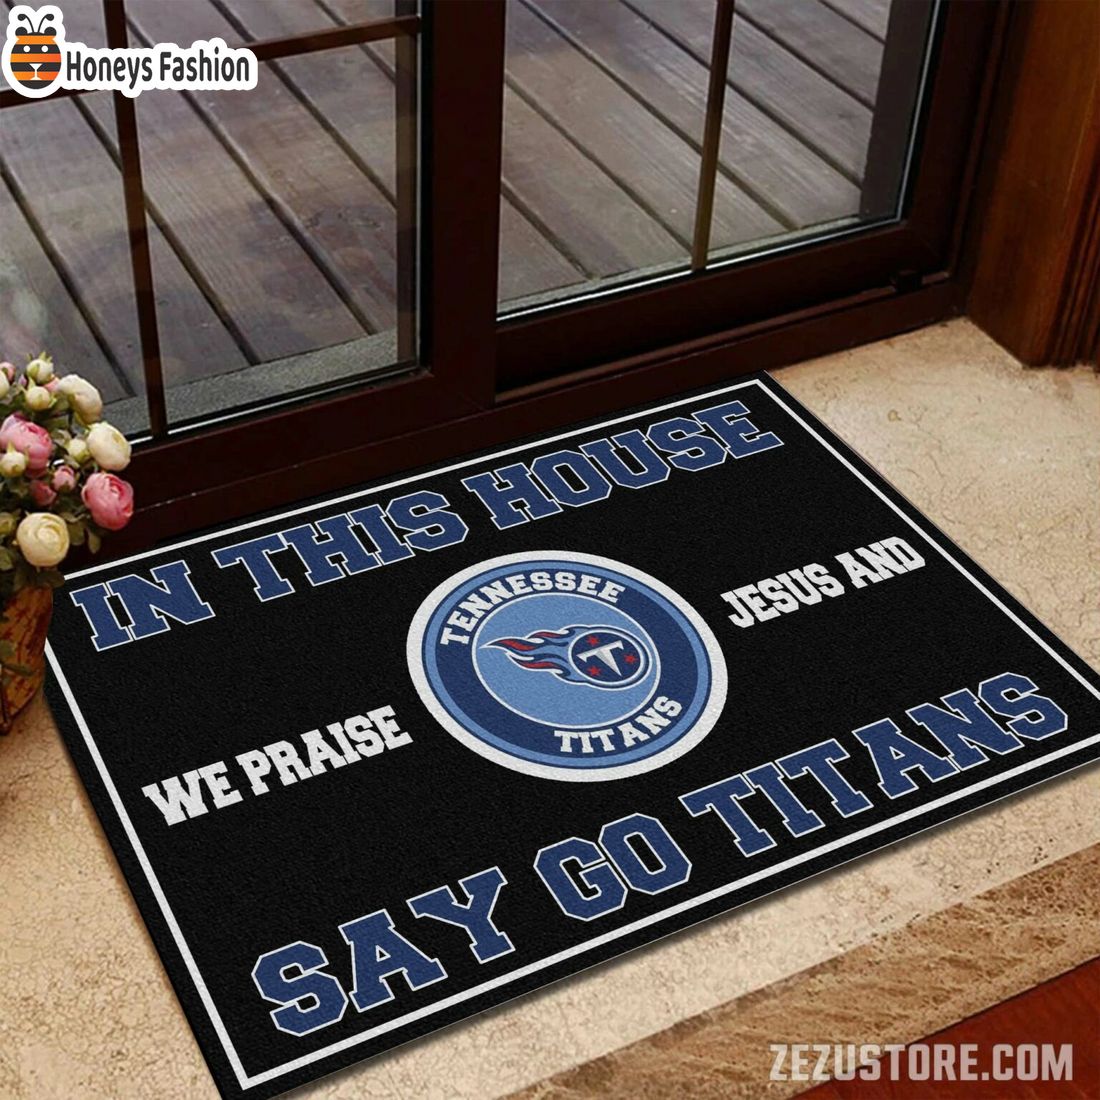 In this house we praise jesus and say go Titans doormat